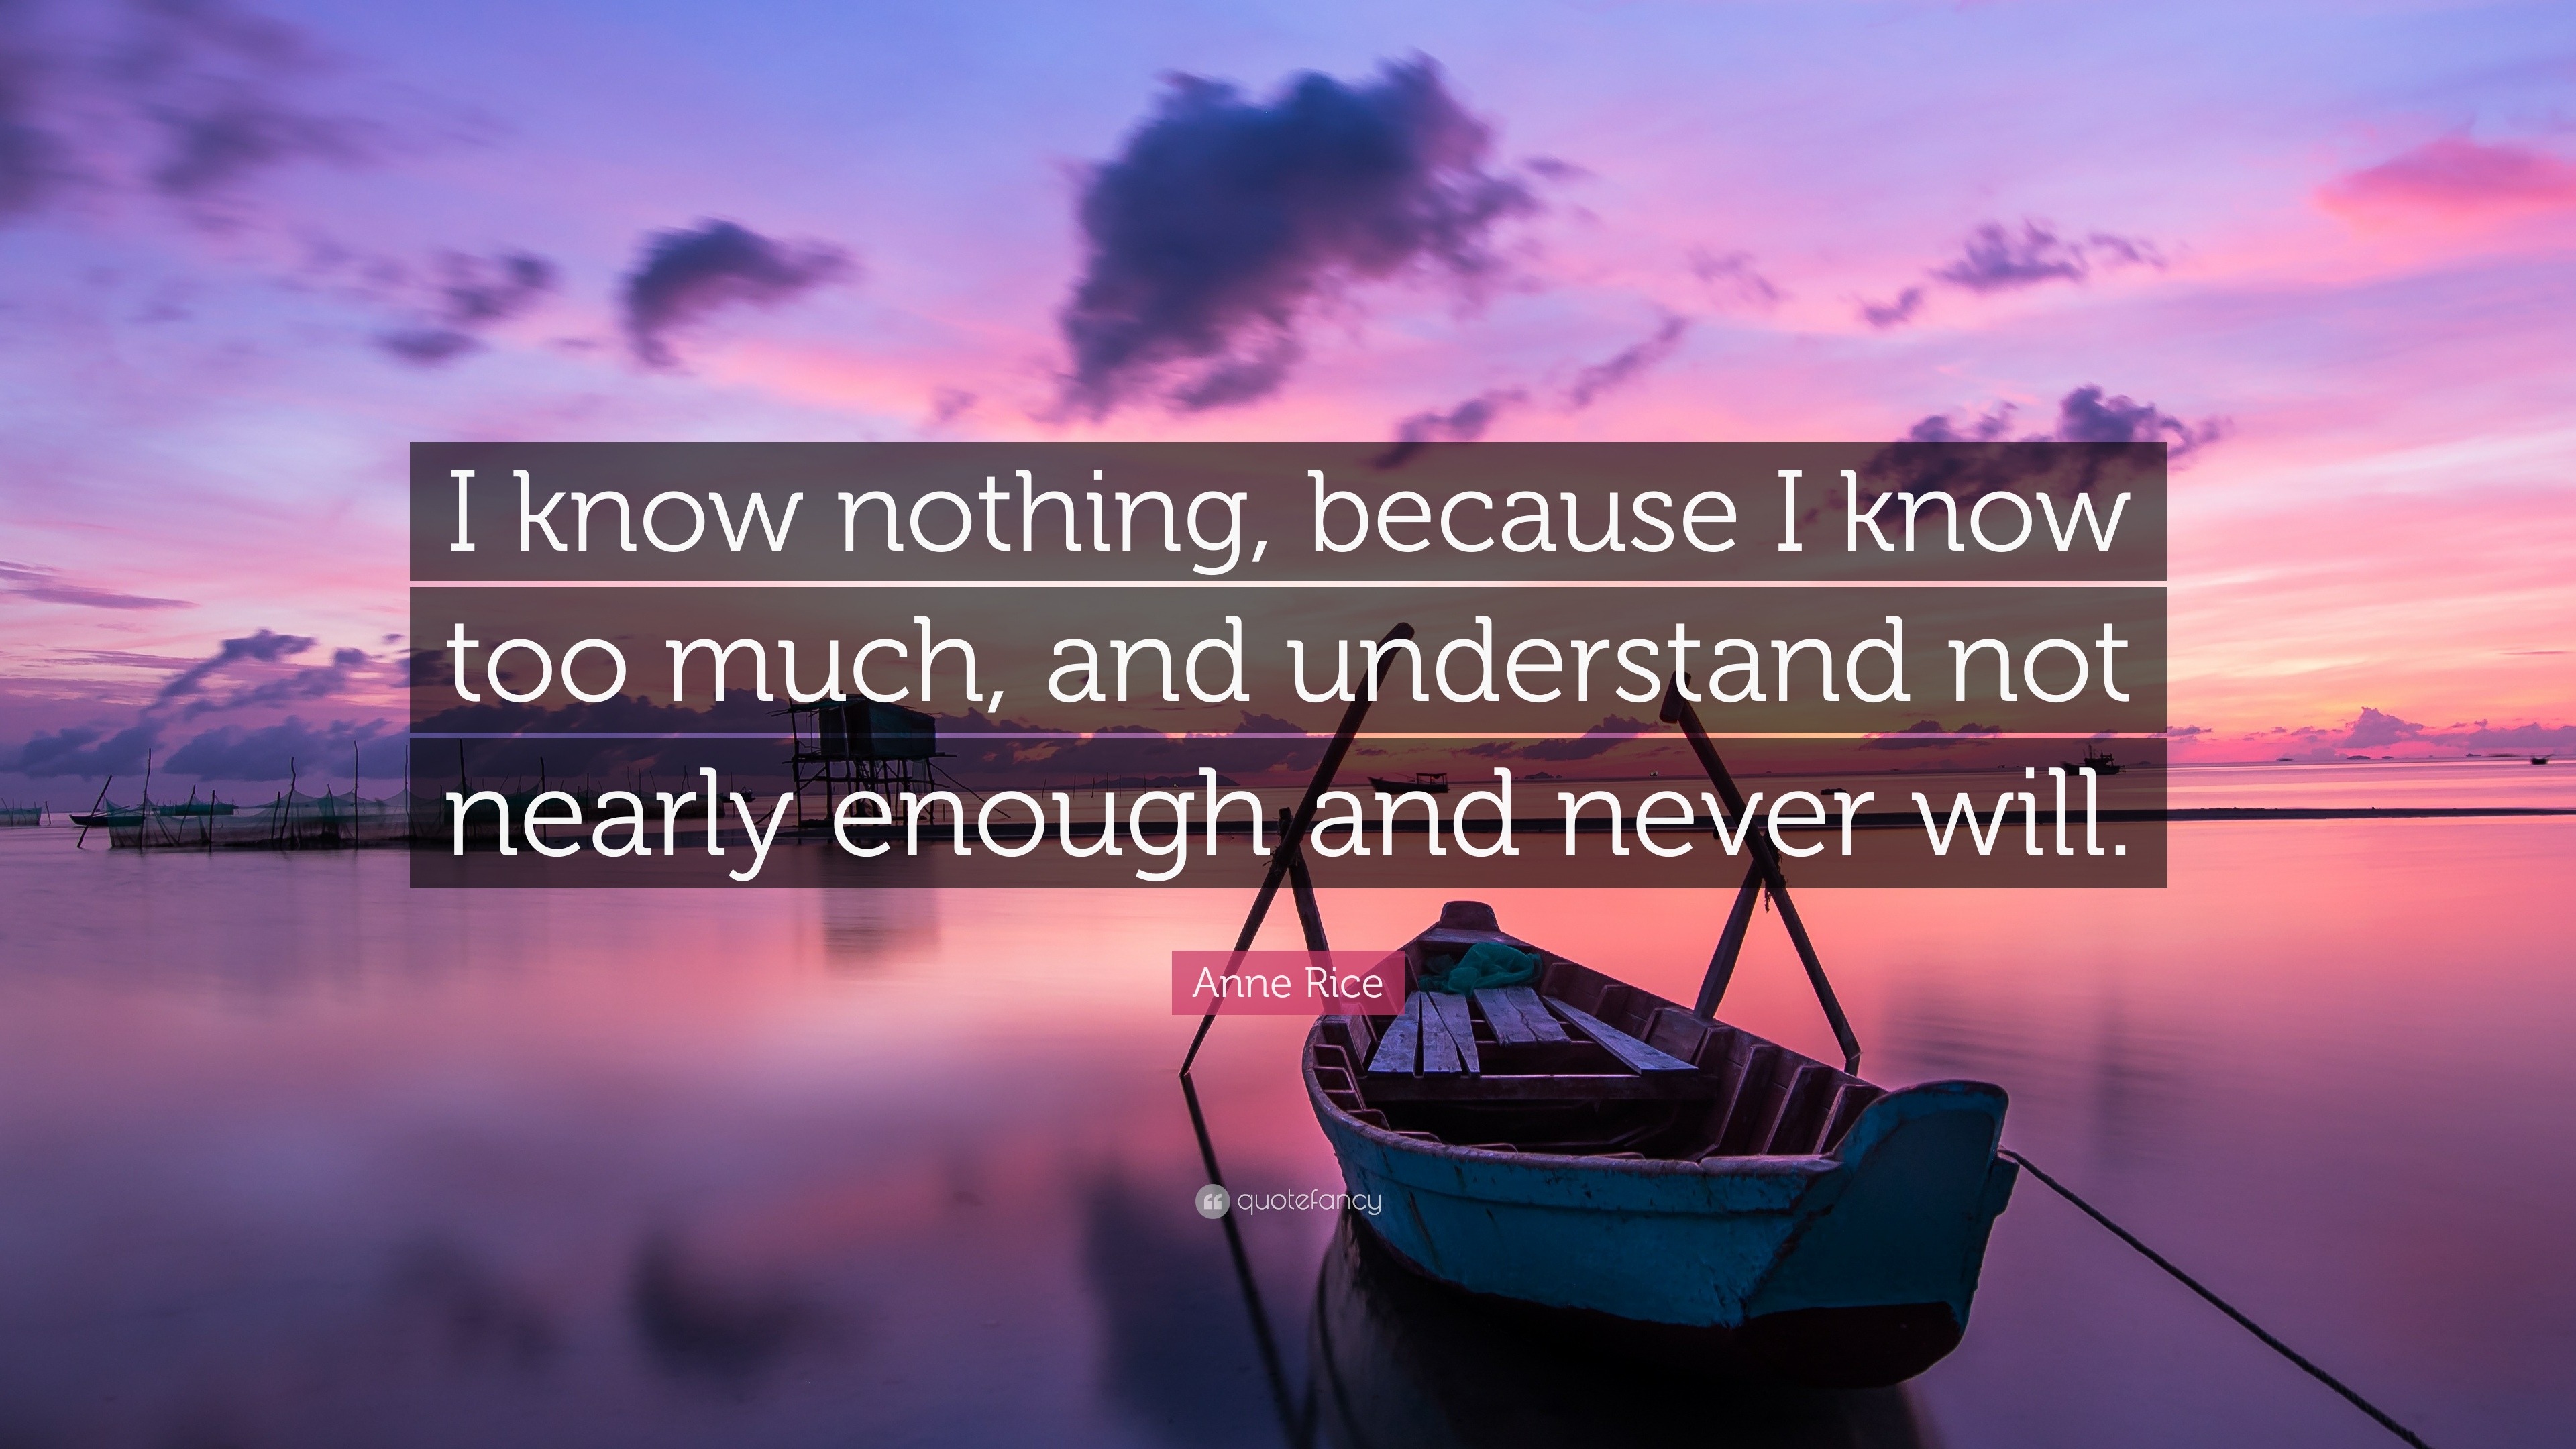 Anne Rice Quote: “I know nothing, because I know too much, and ...